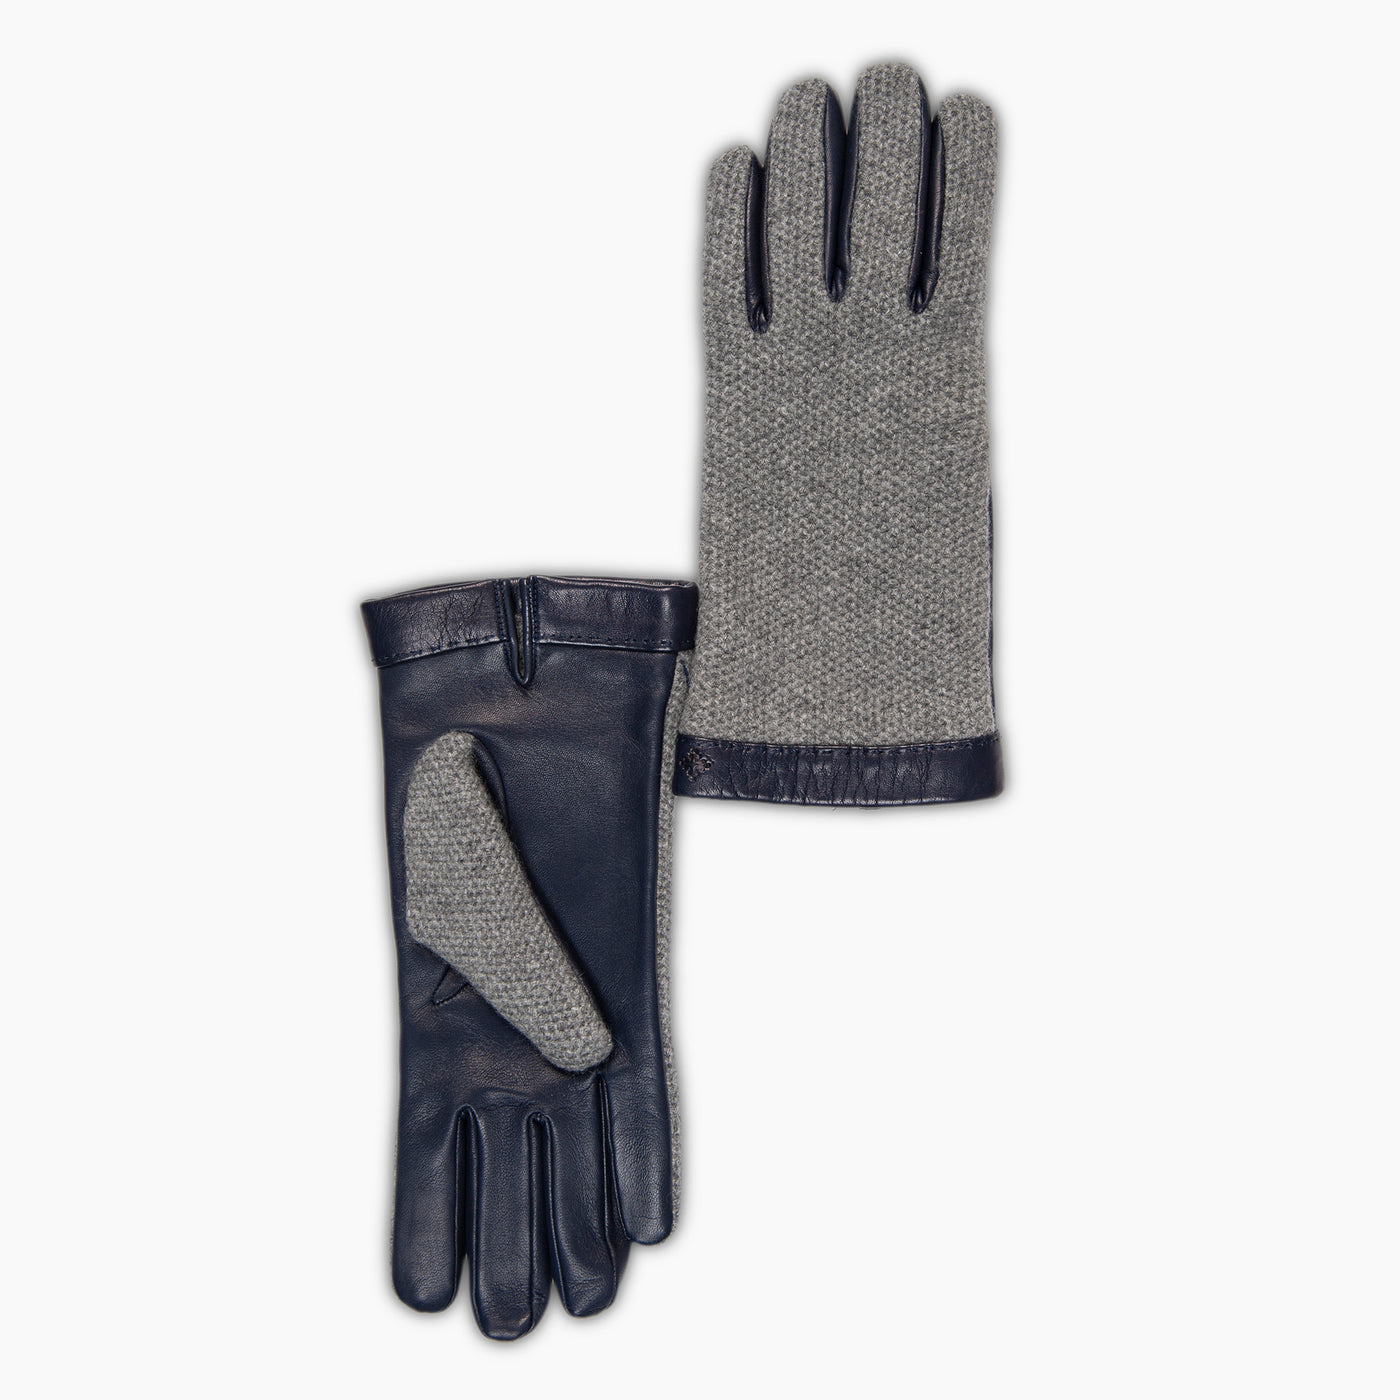 Hugo Leather gloves-cashmere knit and soft nappa